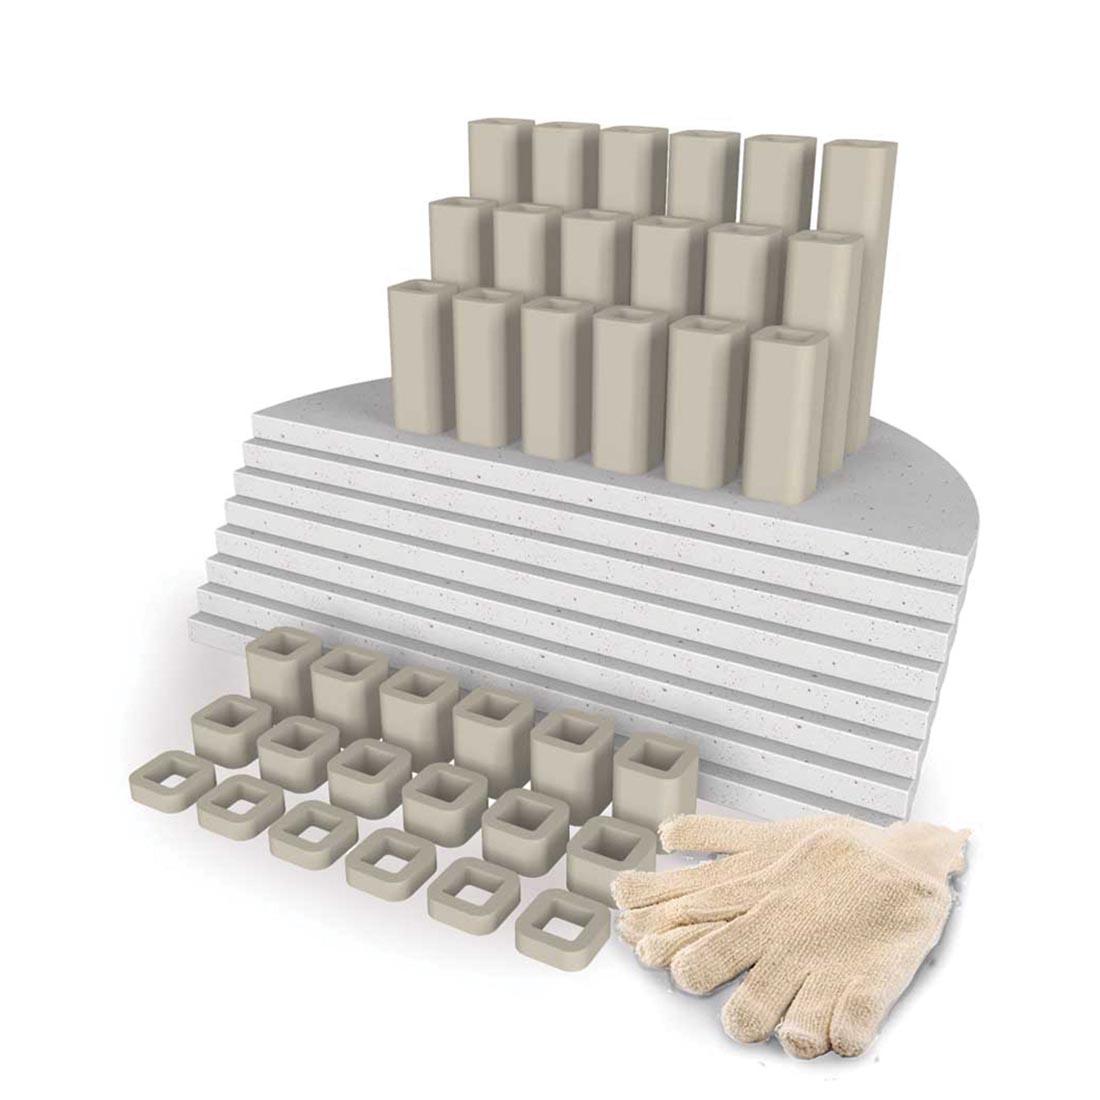 Furniture Kit For School-Master Low-Fire Kiln, showing shelves, posts and gloves